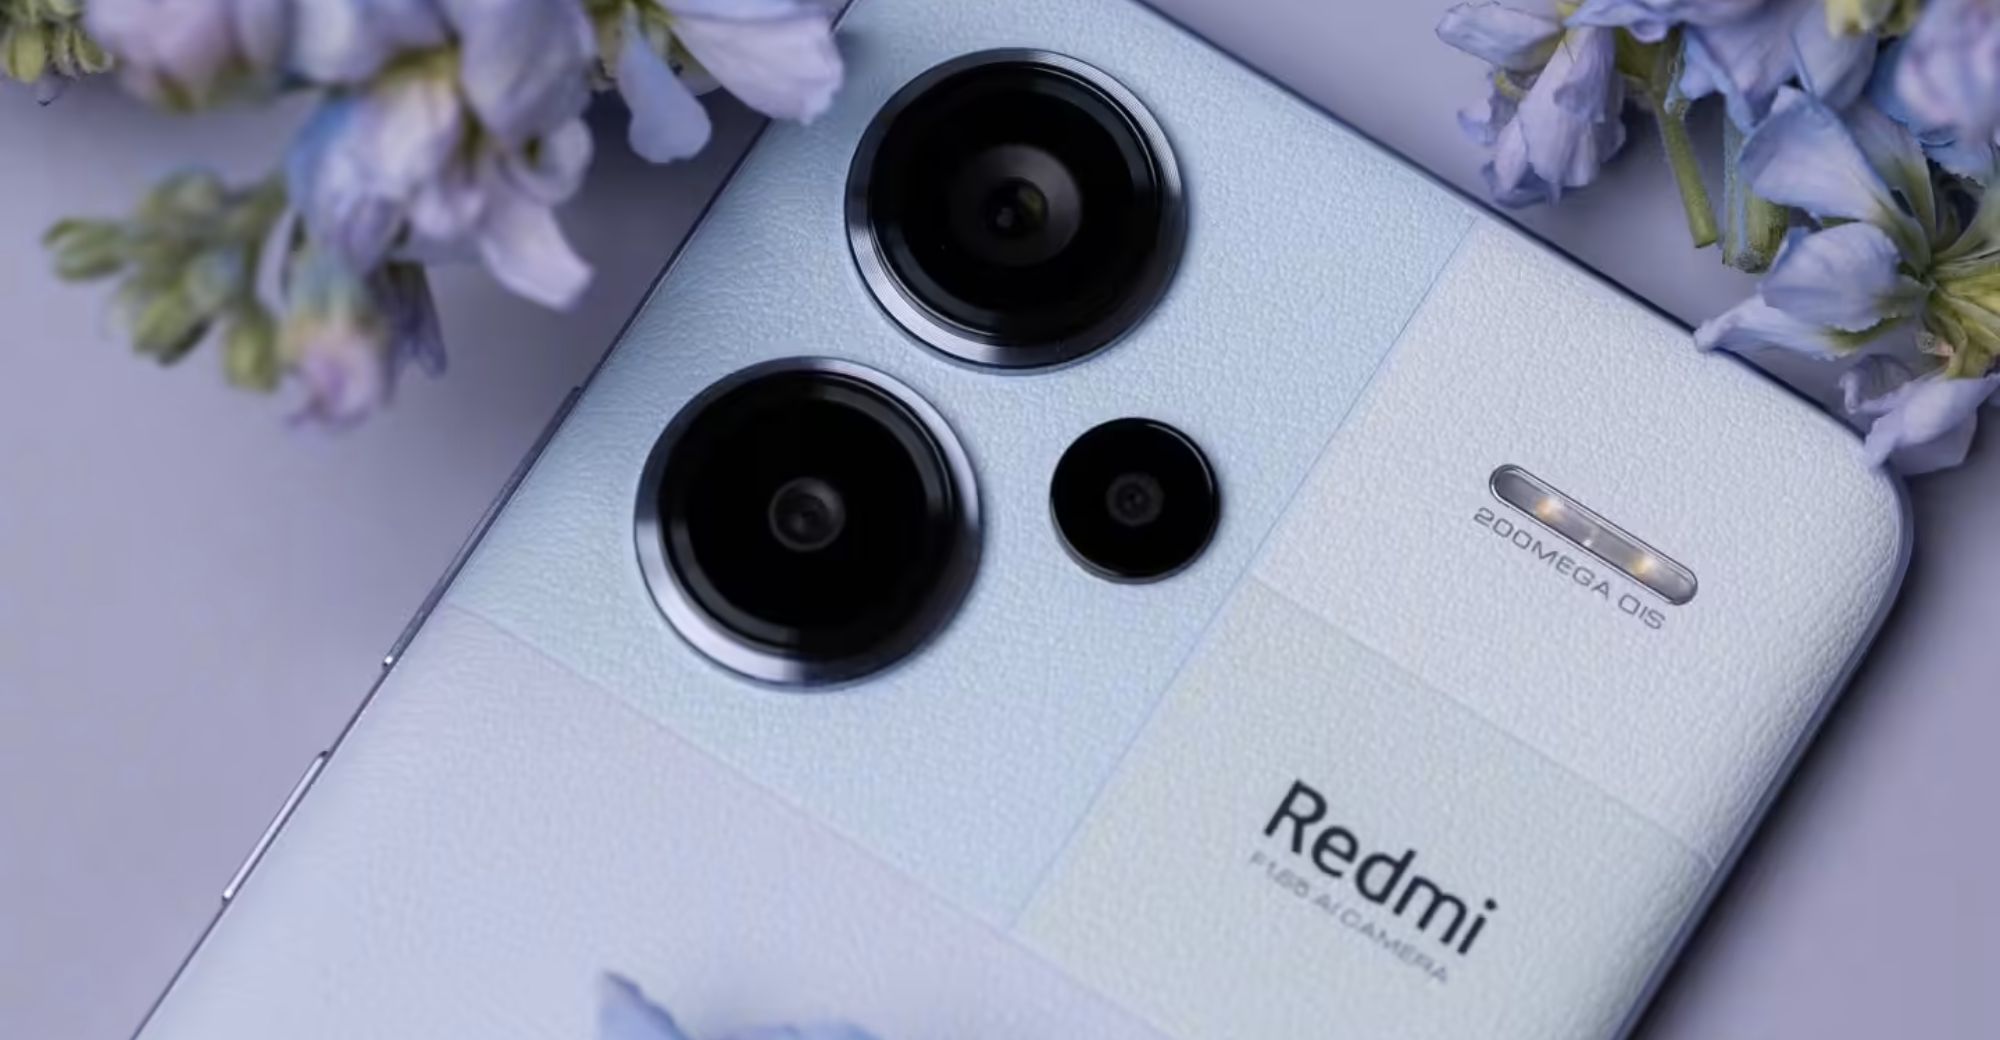 Redmi Note 13 Pro Plus Aape Limited Edition